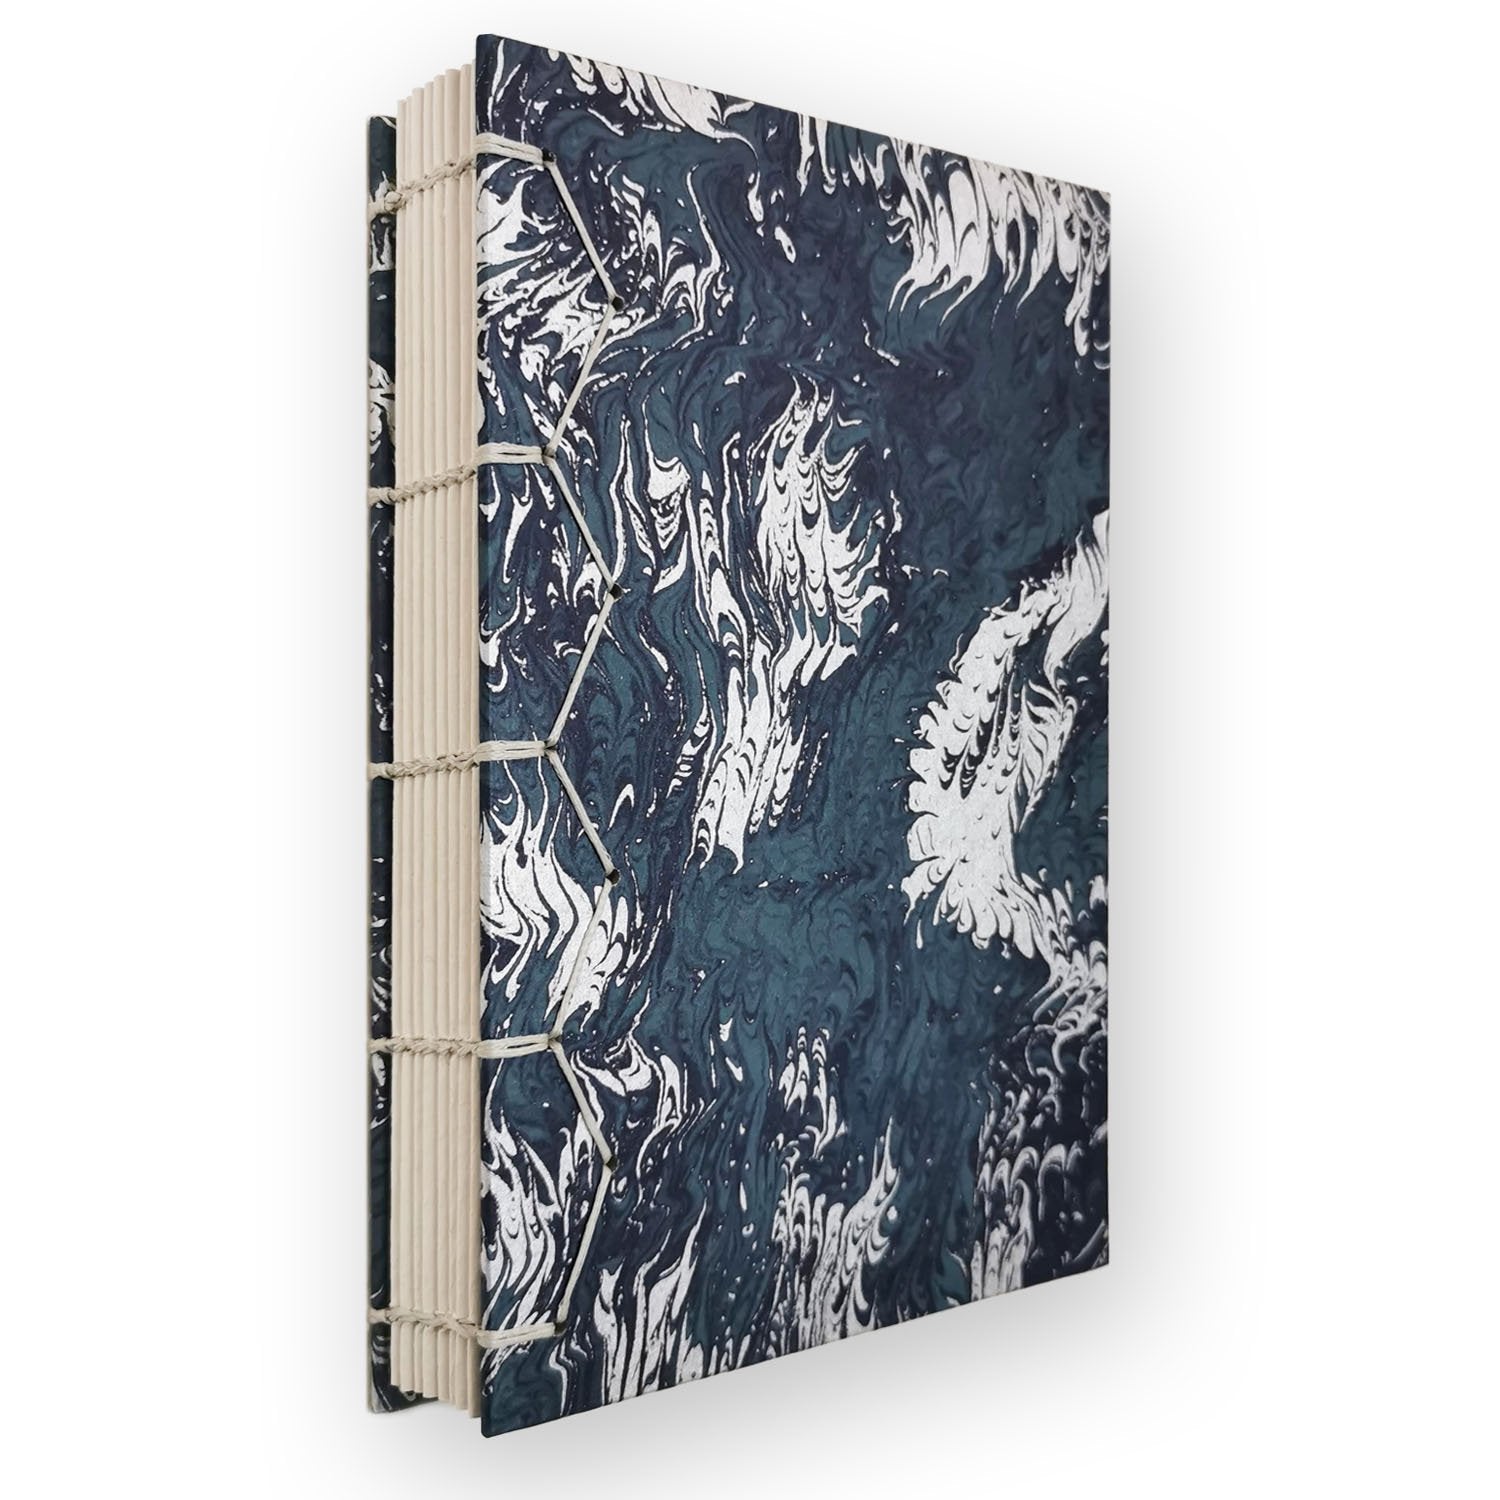 Weekly Calendar with Byzantine Binding - Blue Silver Marble Art